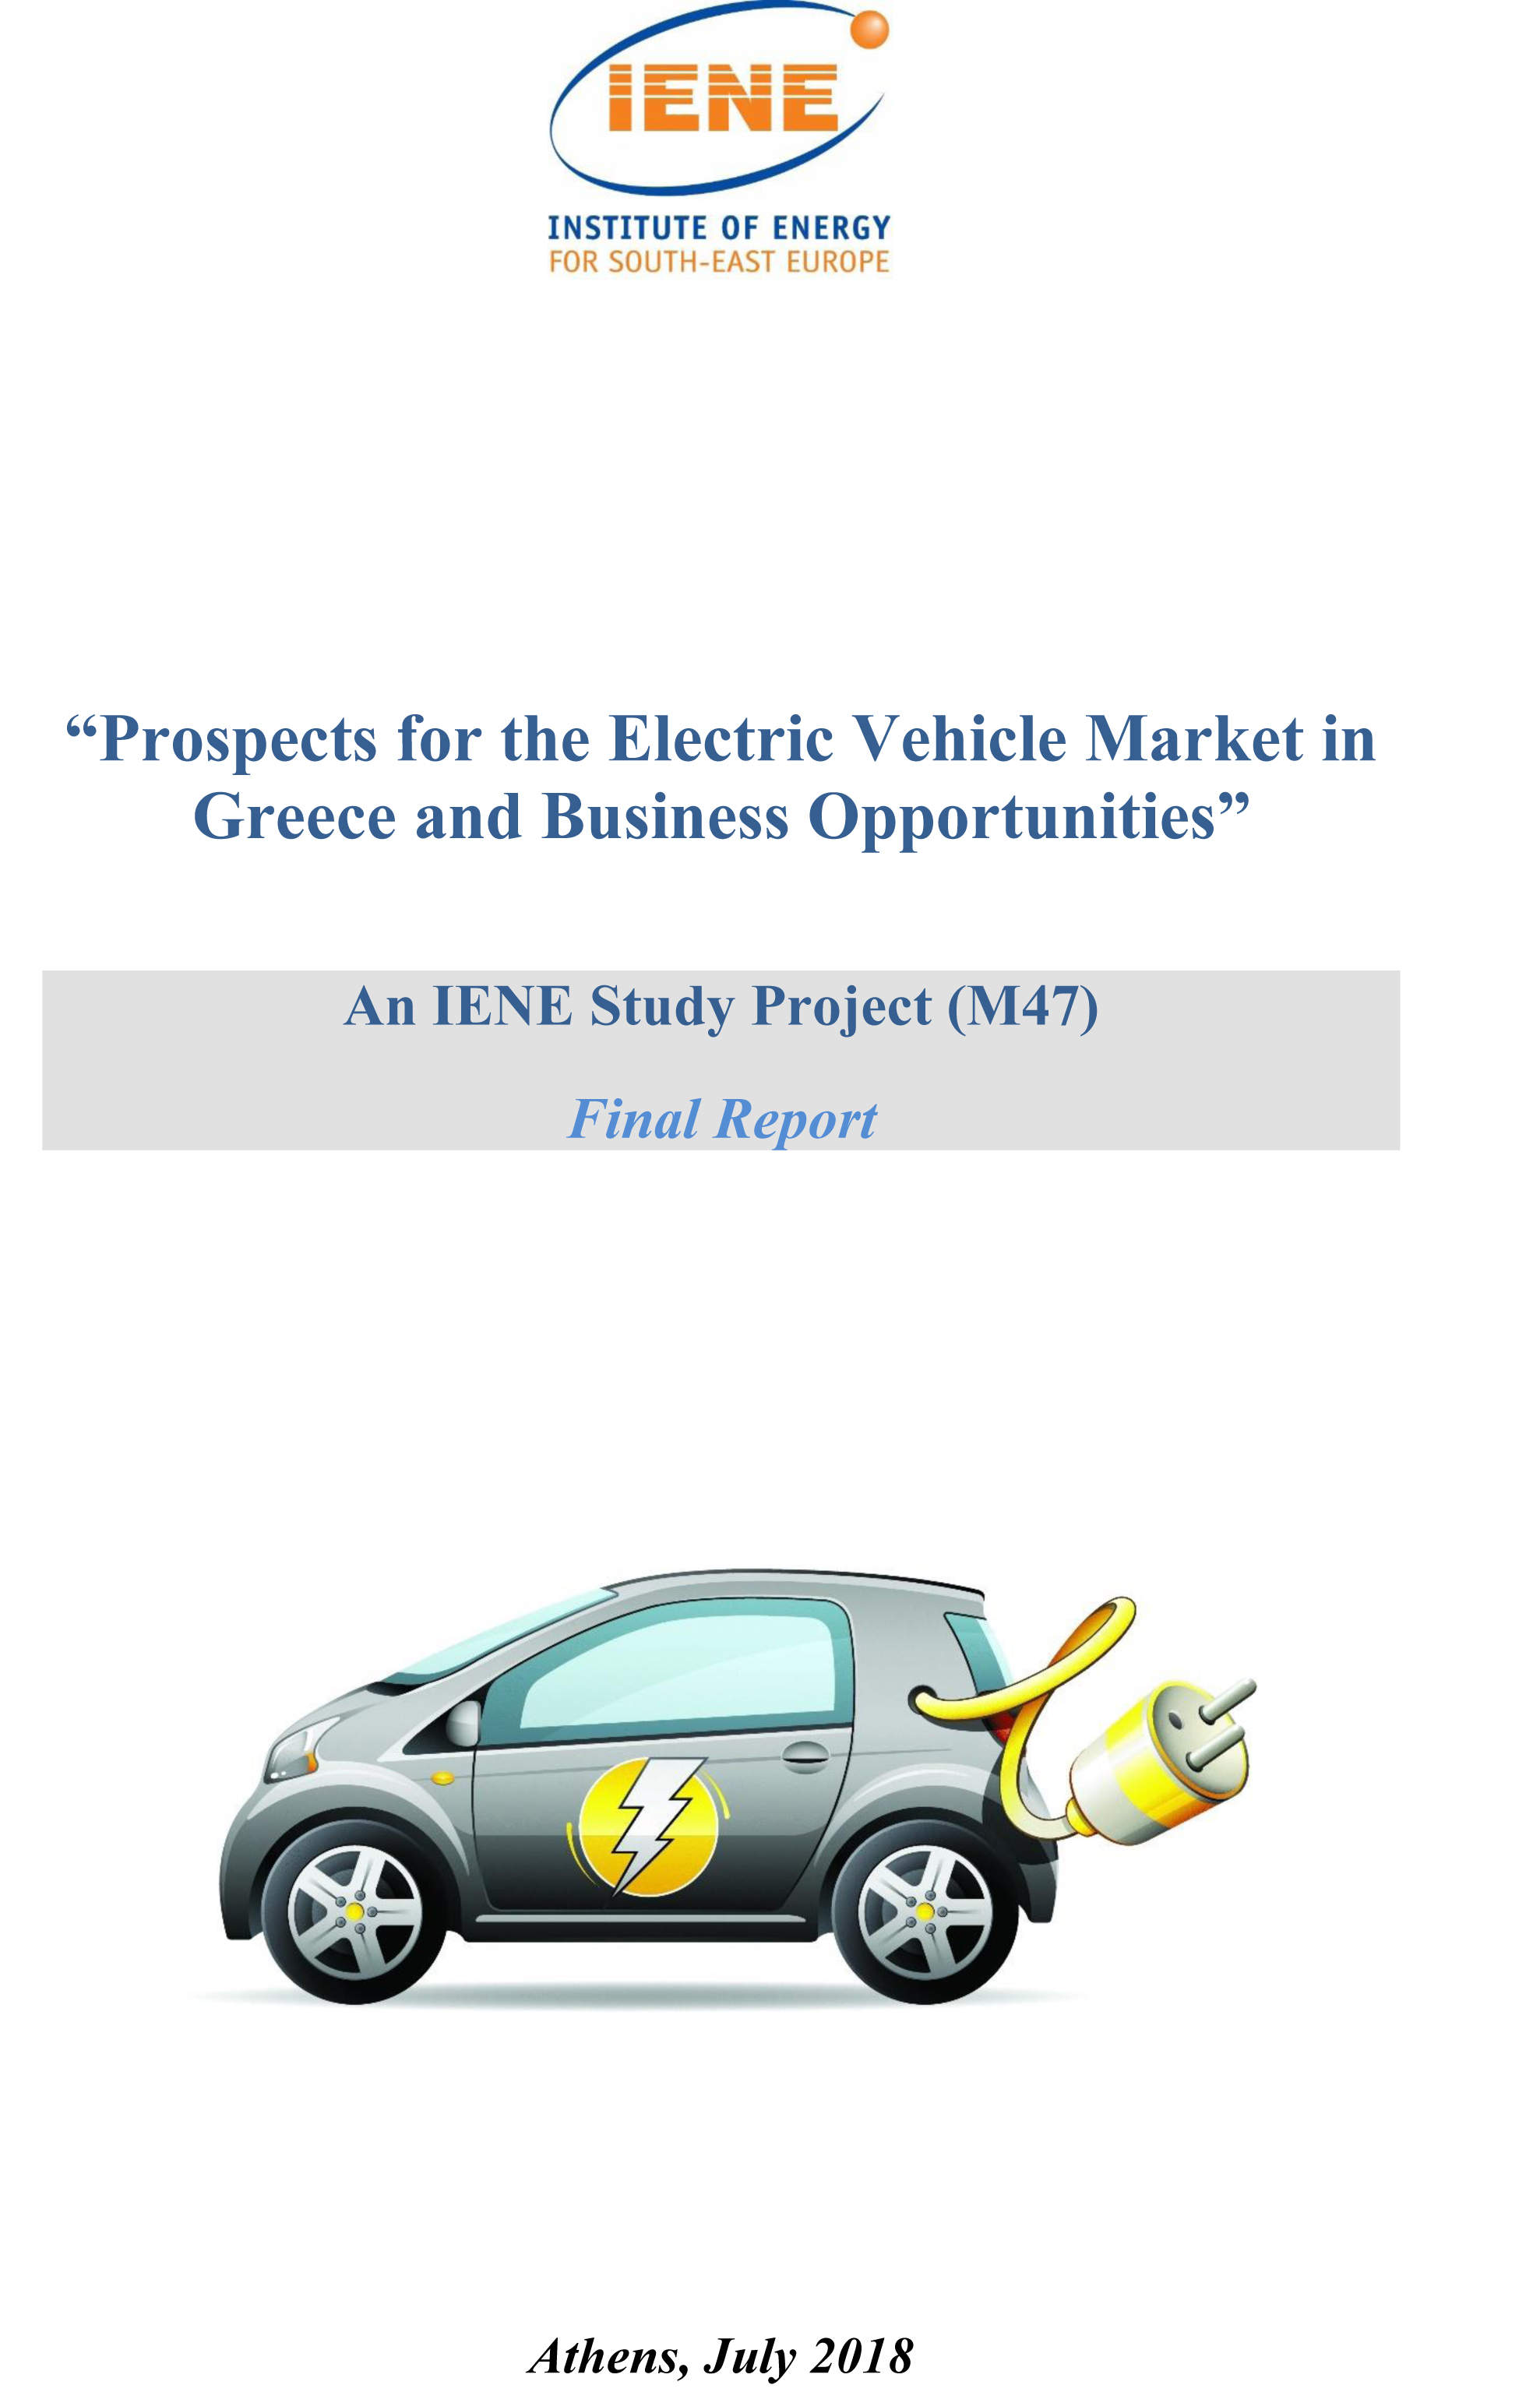 Prospects for the Electric Vehicle Market in Greece and Business